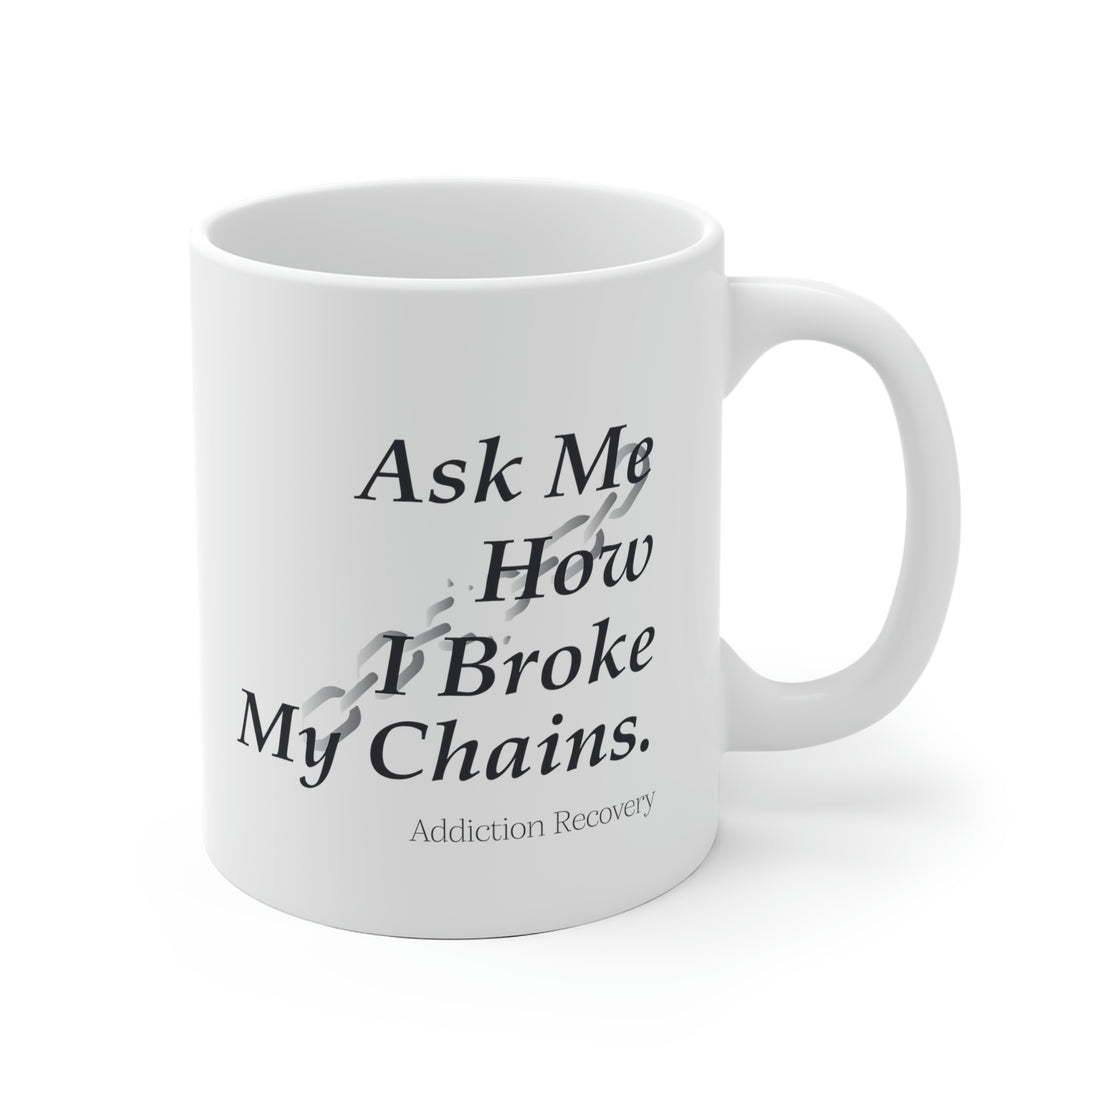 Ask Me How I Broke My Chains - White Ceramic Mug 2 sizes Available